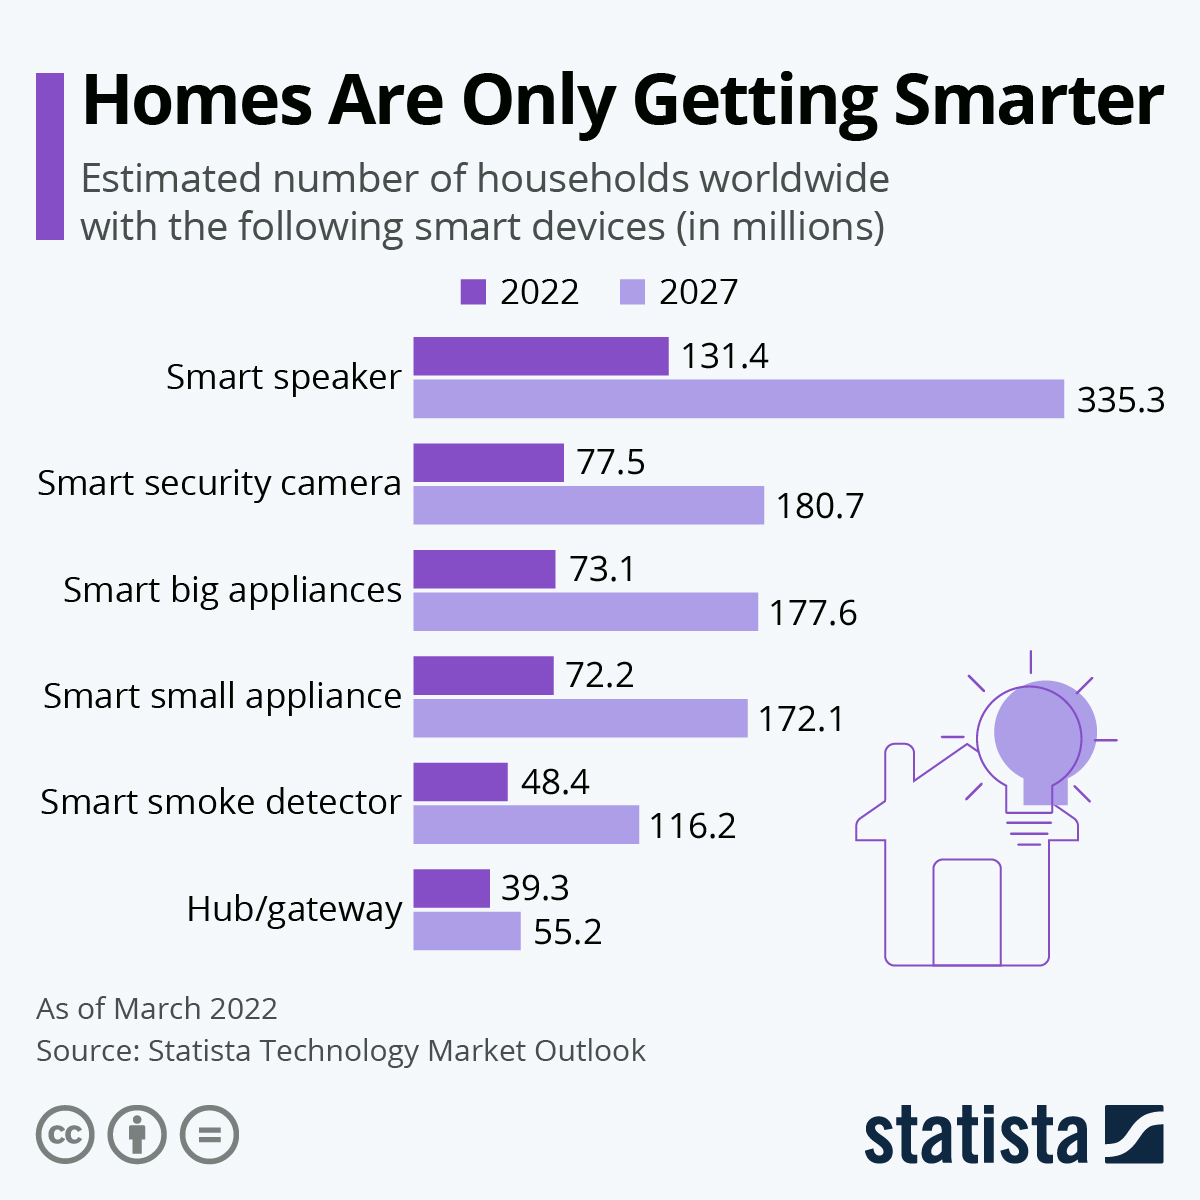 A horizontal bar chart showing the growing market size of smart home devices from 2022 to 2027